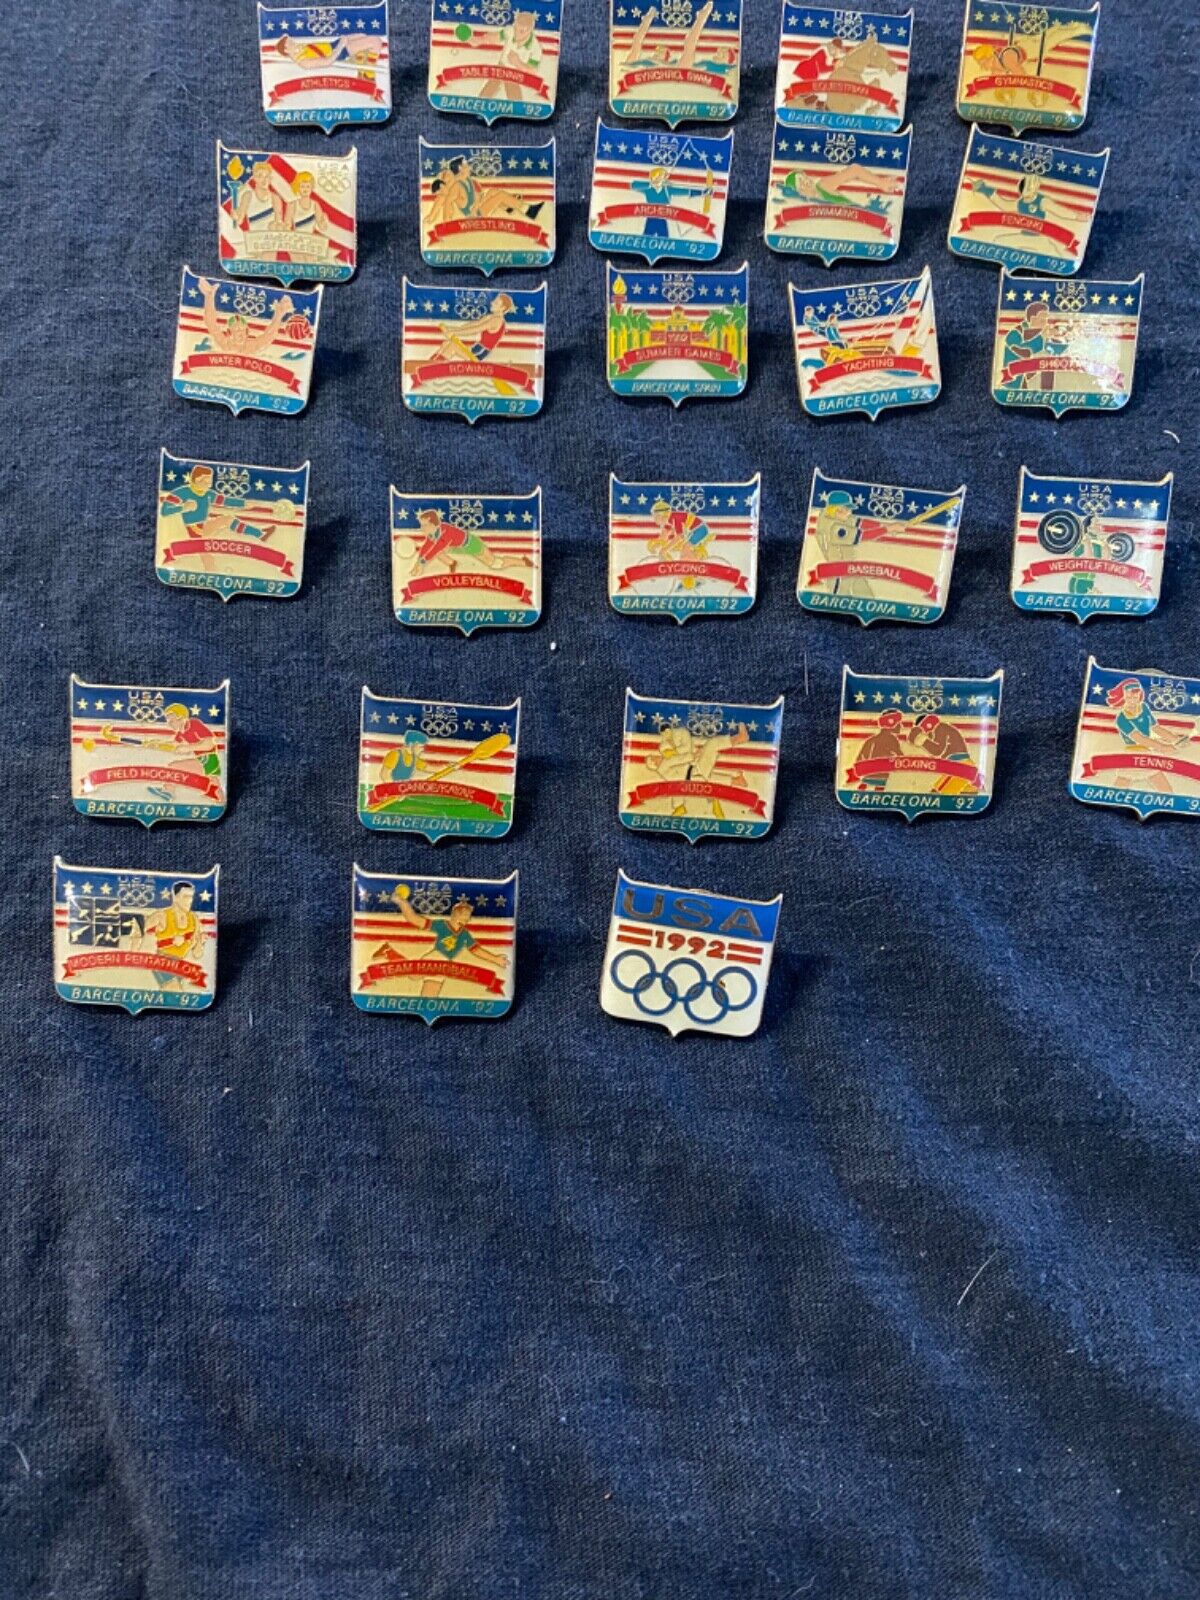 1992 Barcelona Summer Olympic pins 28 different sports